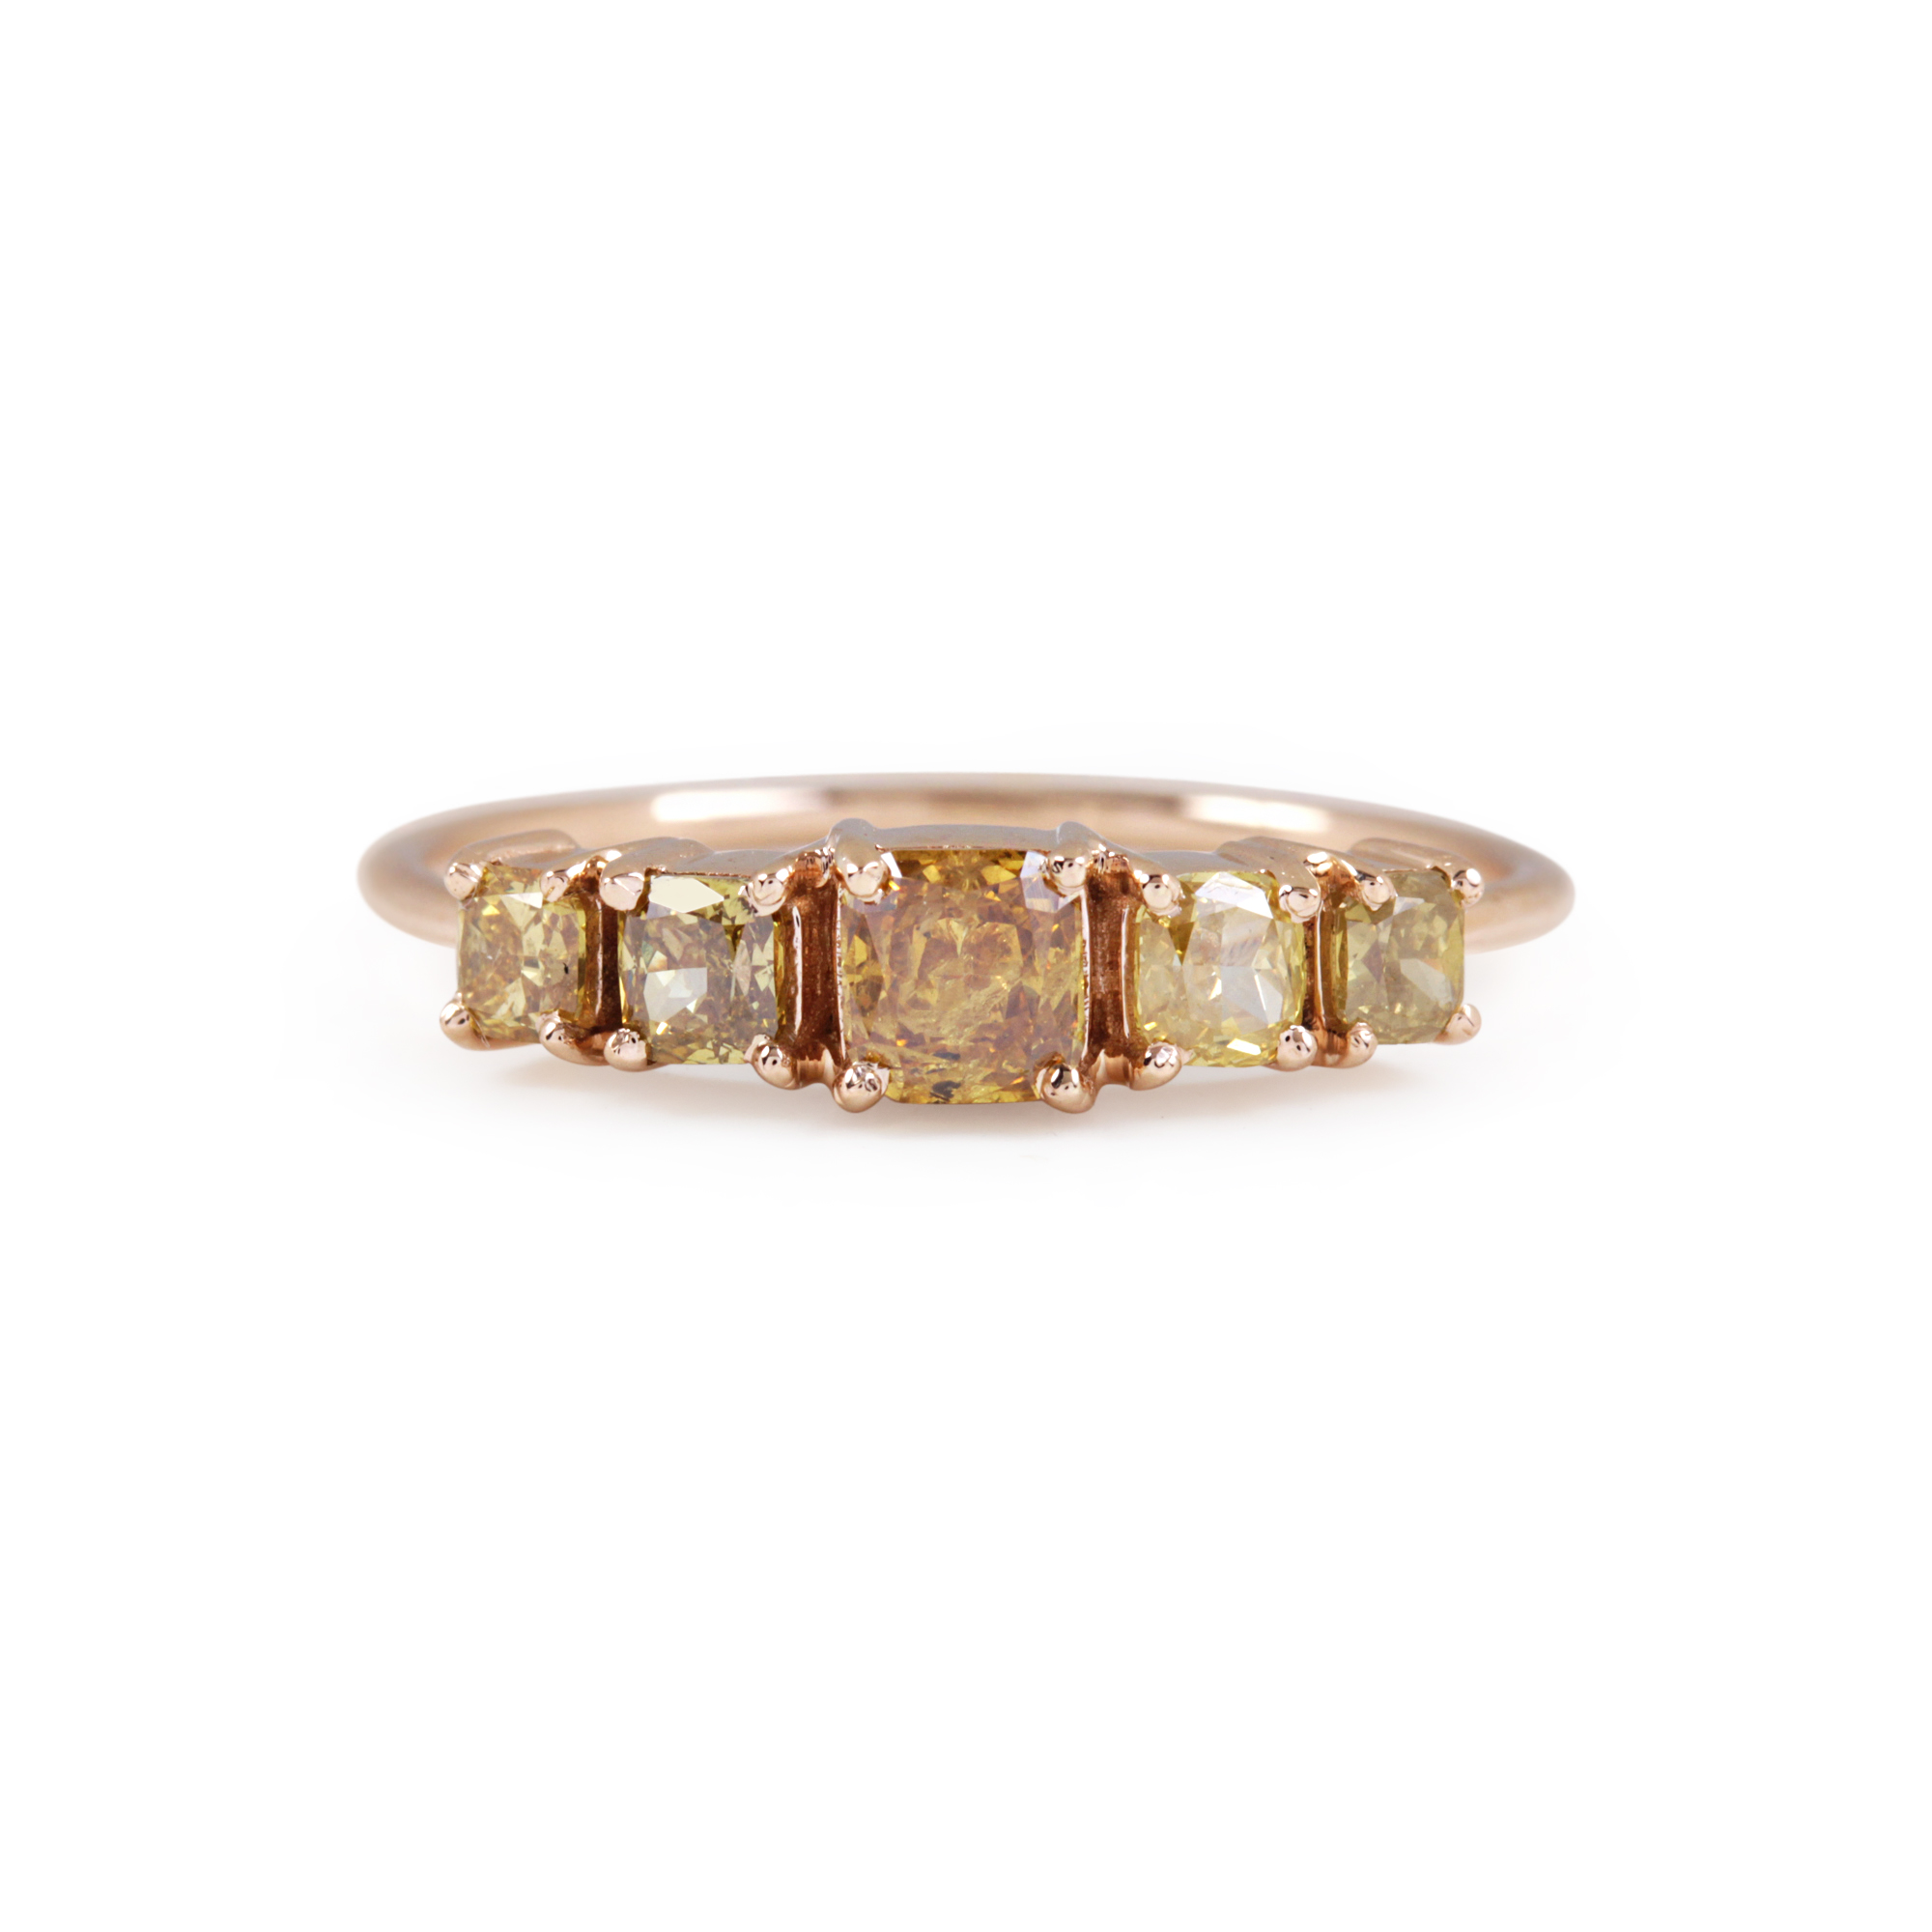 14K Solid Yellow Gold Natural Pave Diamond Ring Jewelry